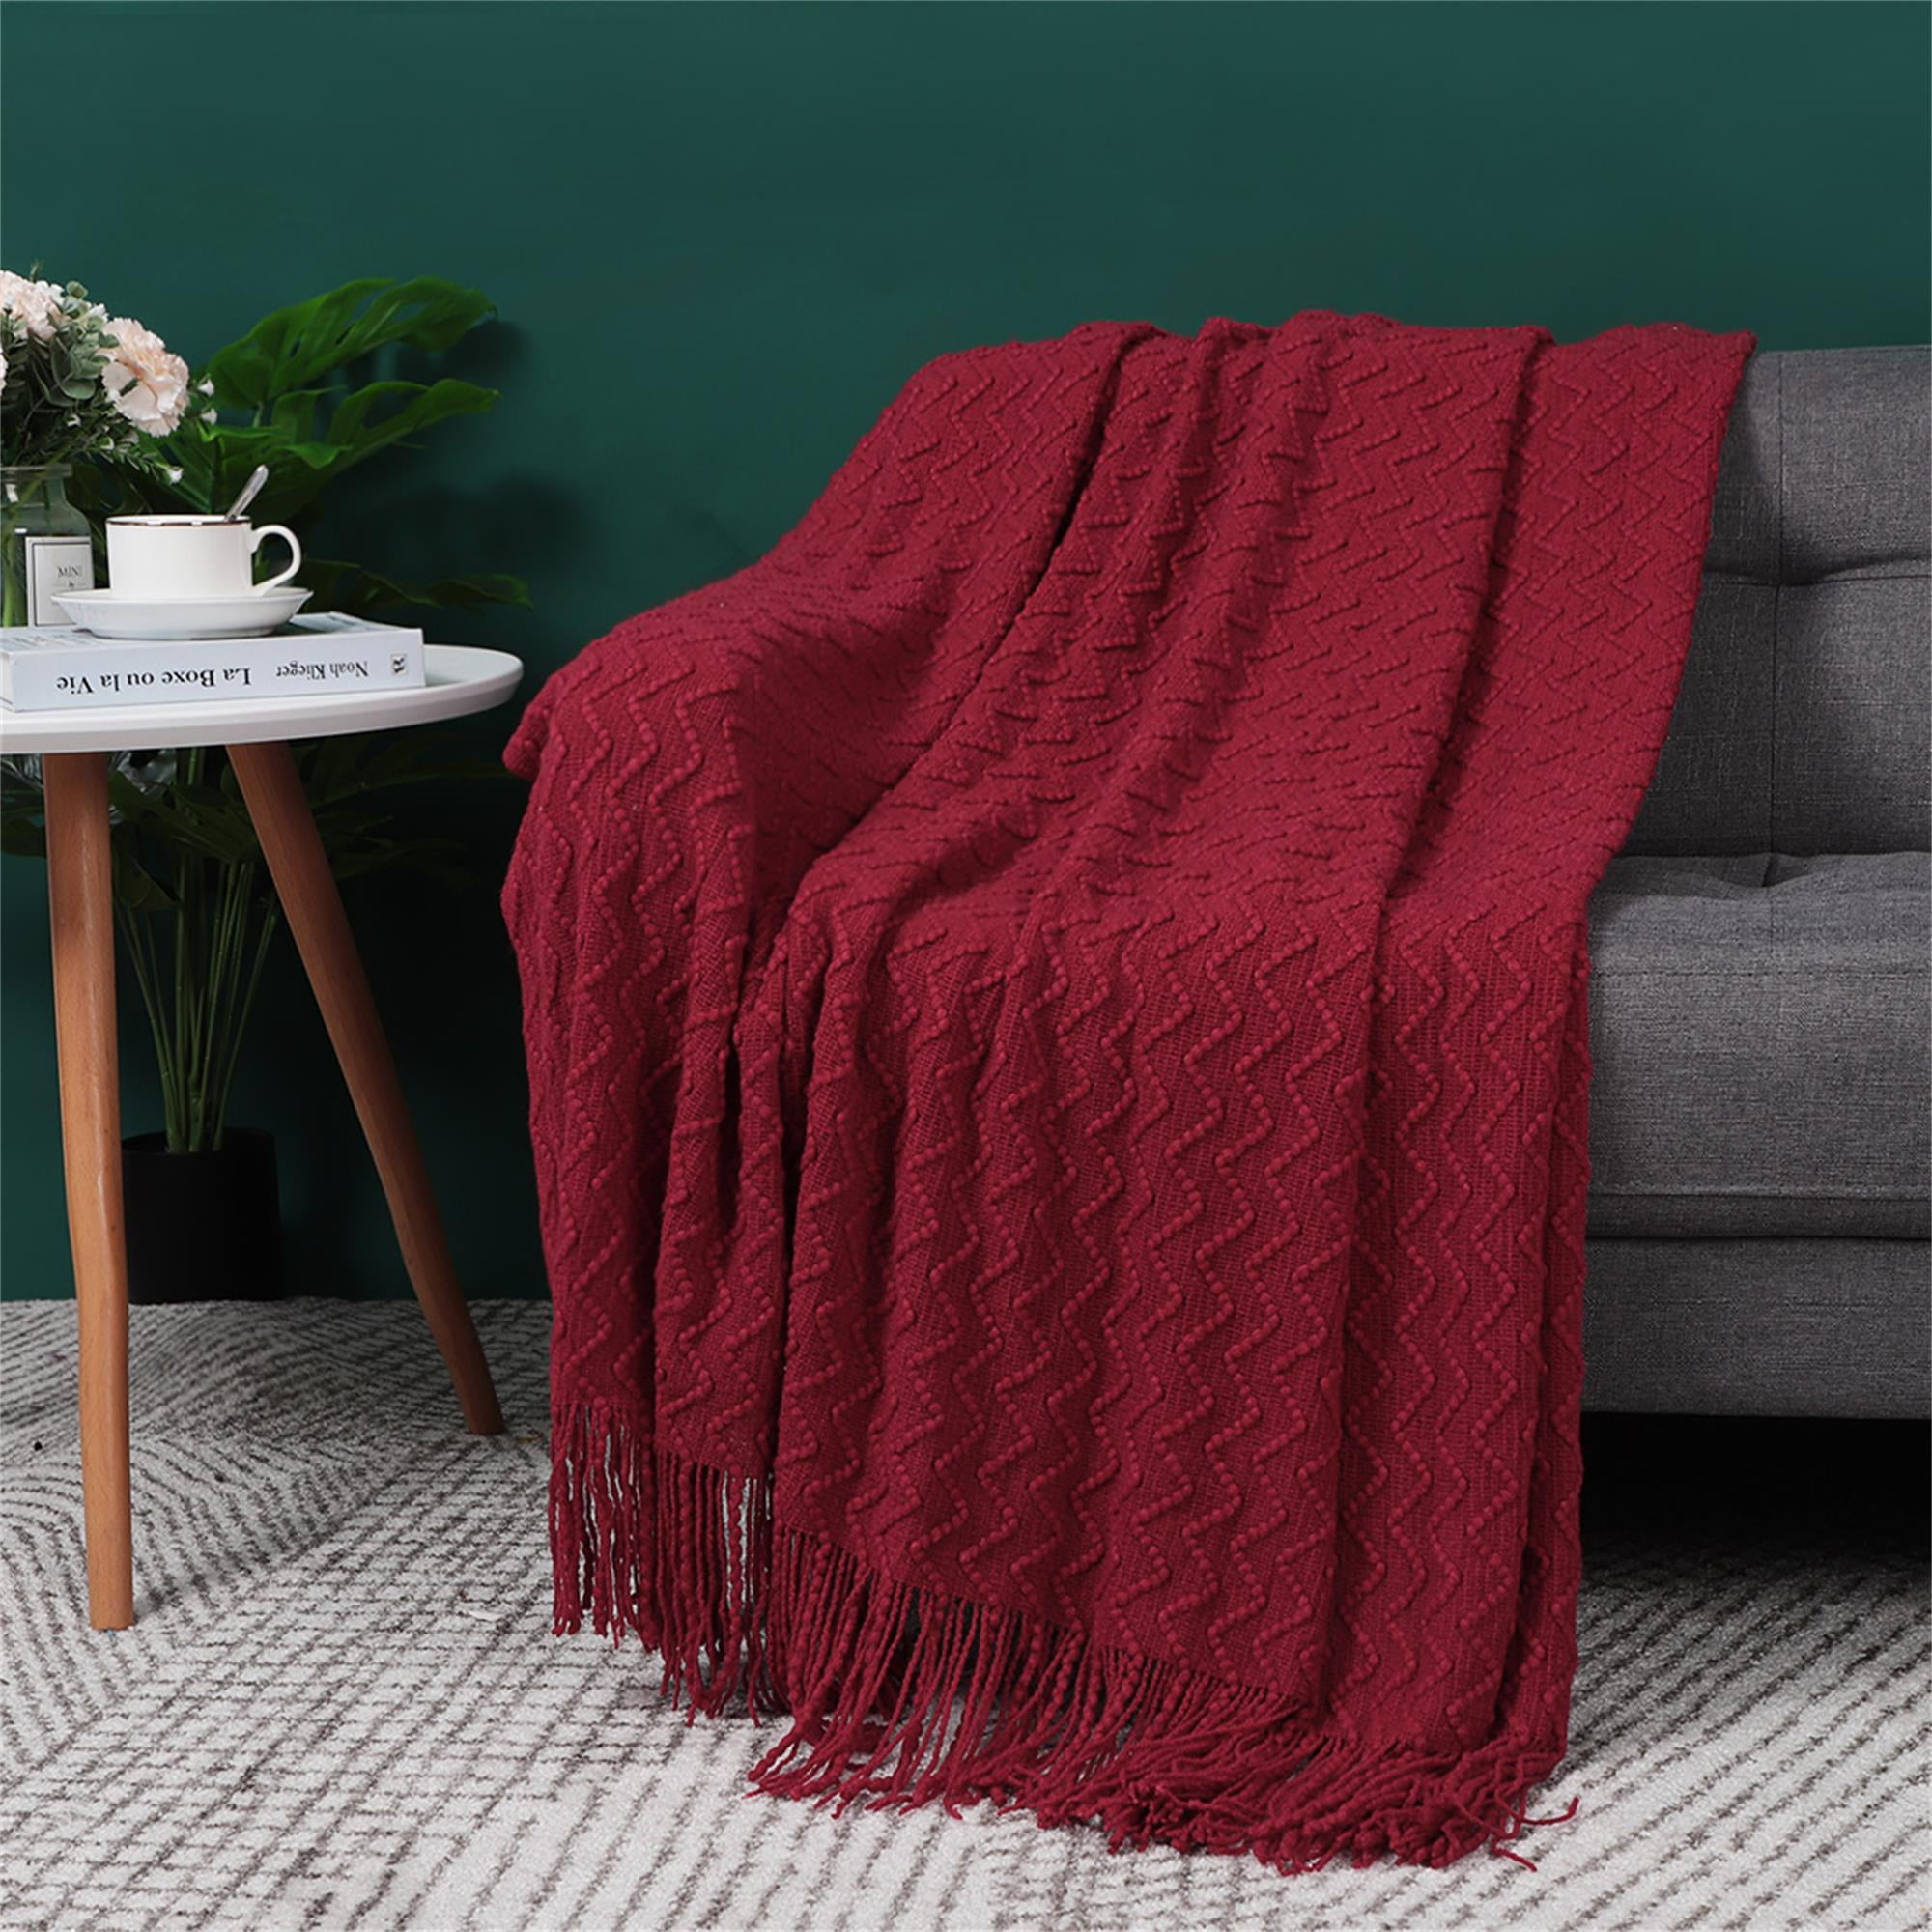 100% Acrylic Knit Throw Blanket Wave Pattern Soft Blanket with Tassels ...